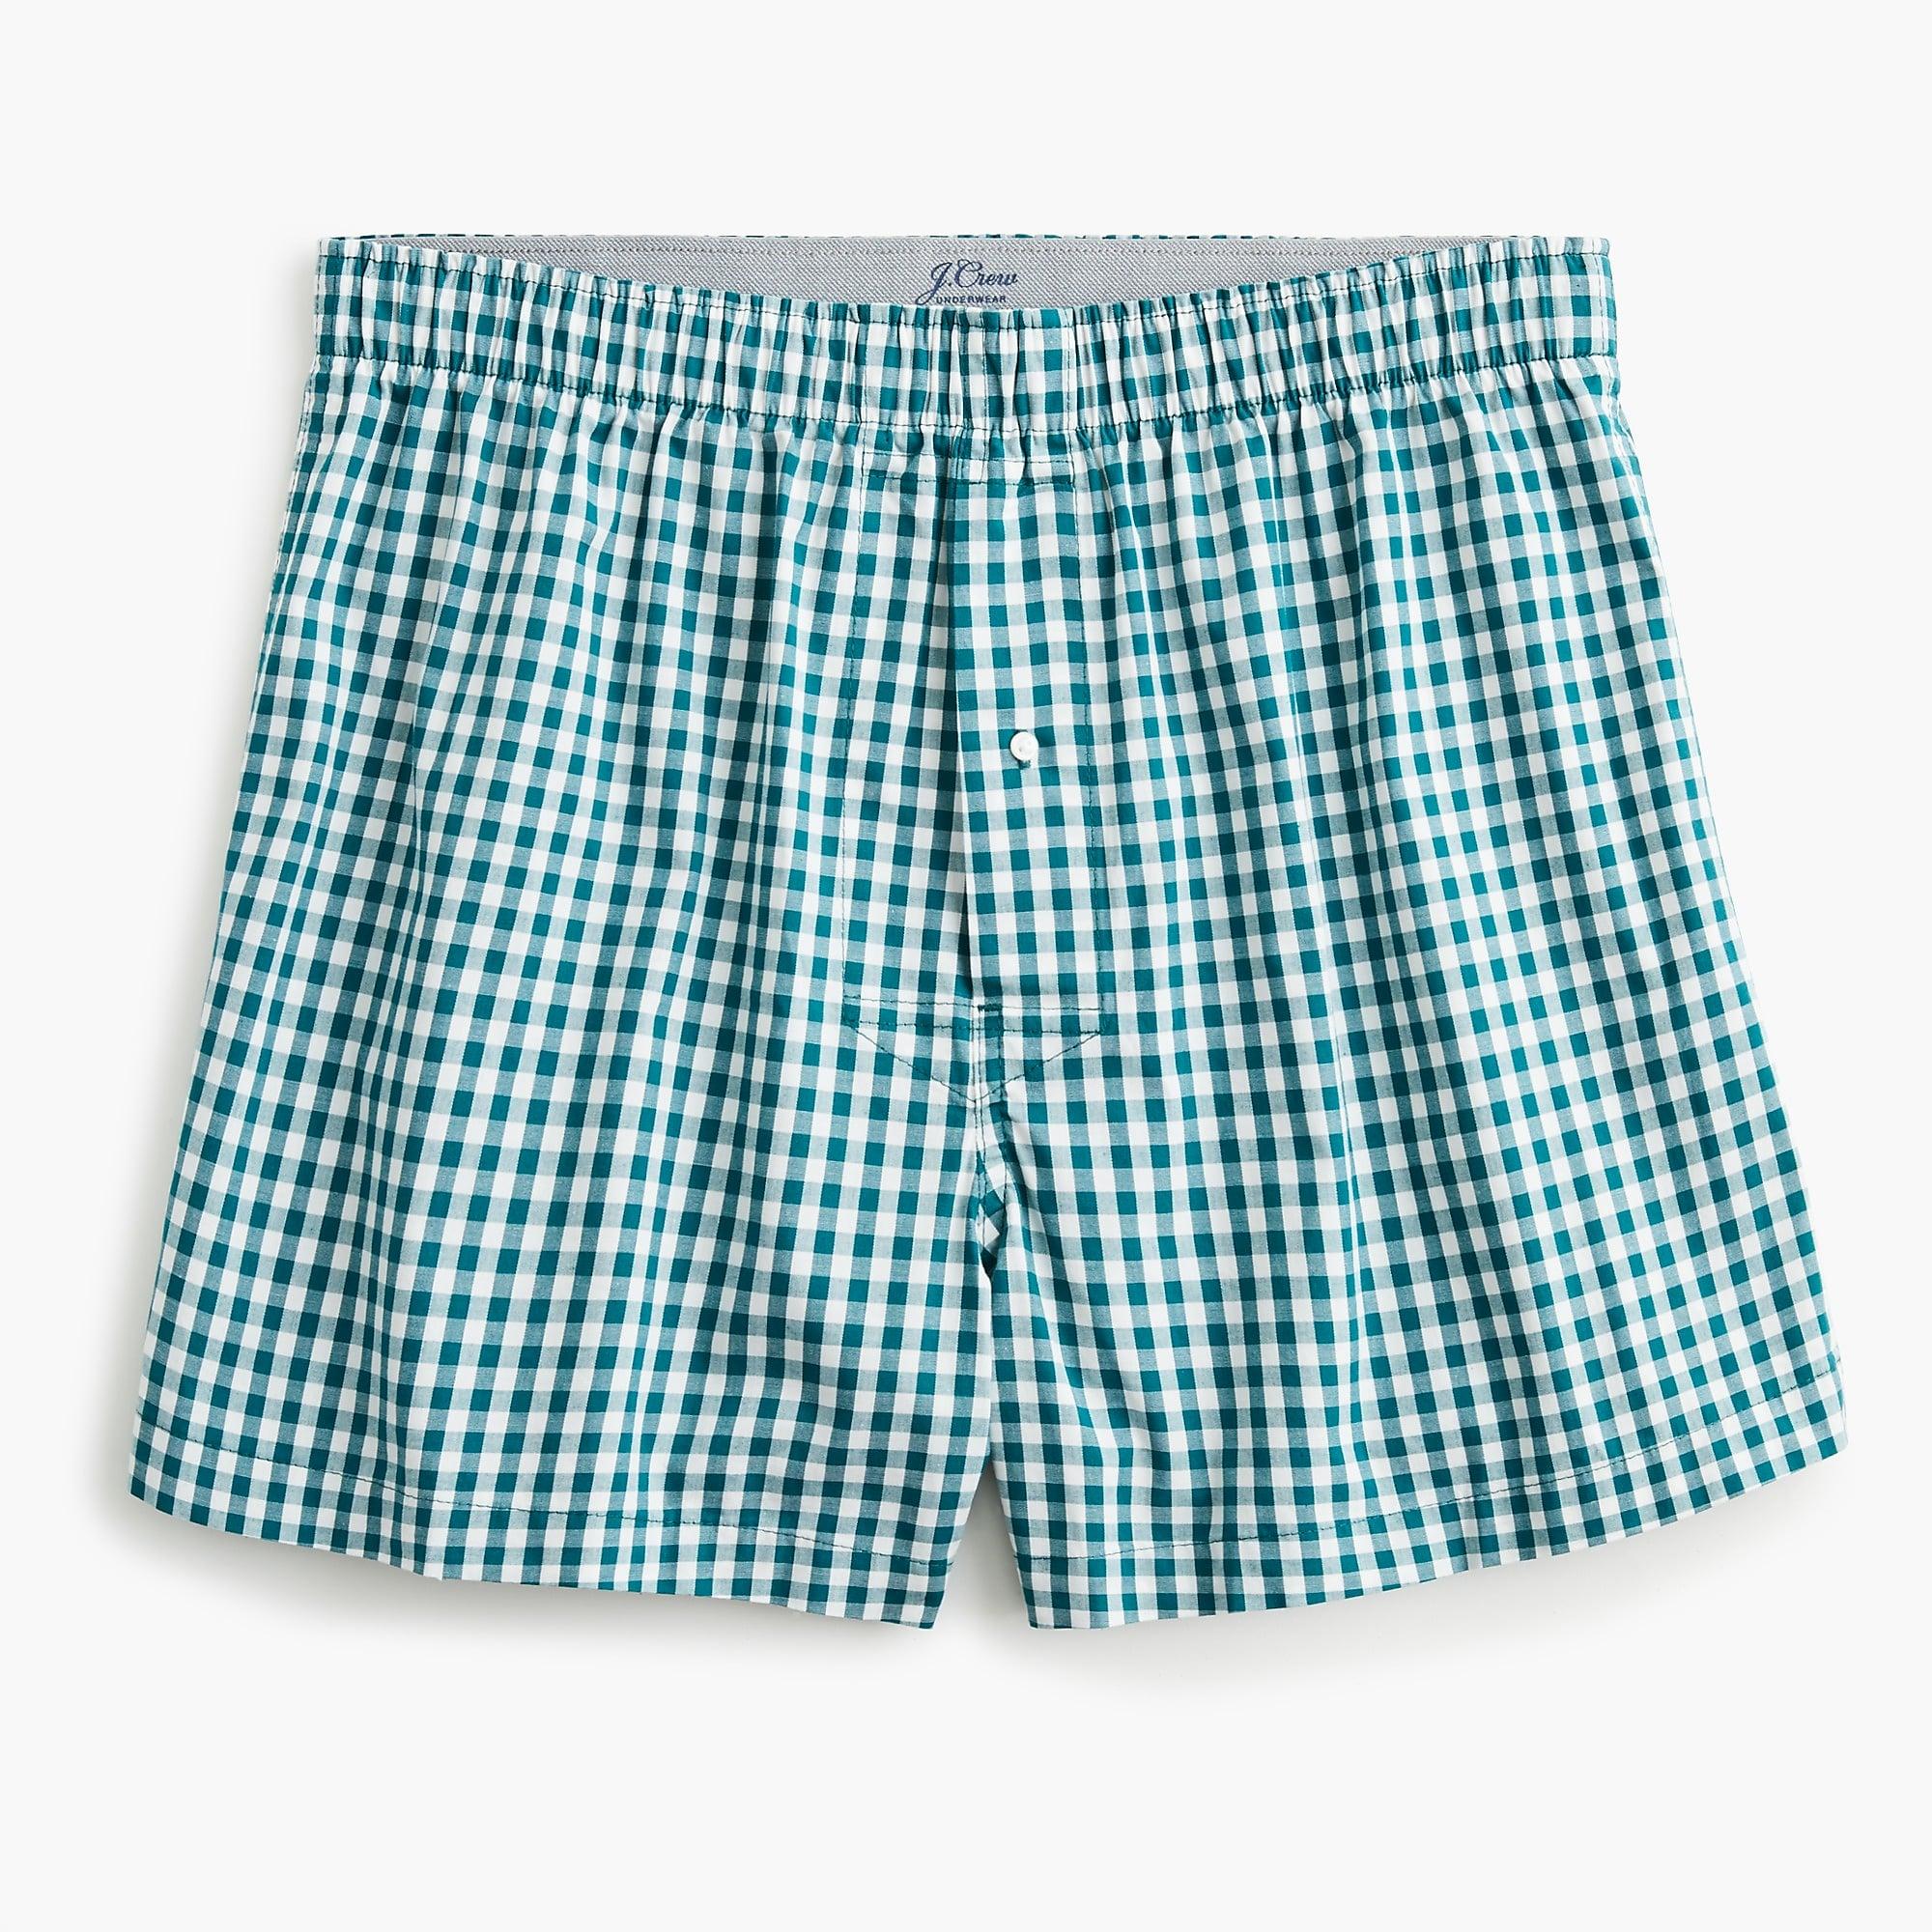 J.Crew Cotton Stretch Red Gingham Boxers in Green for Men - Lyst